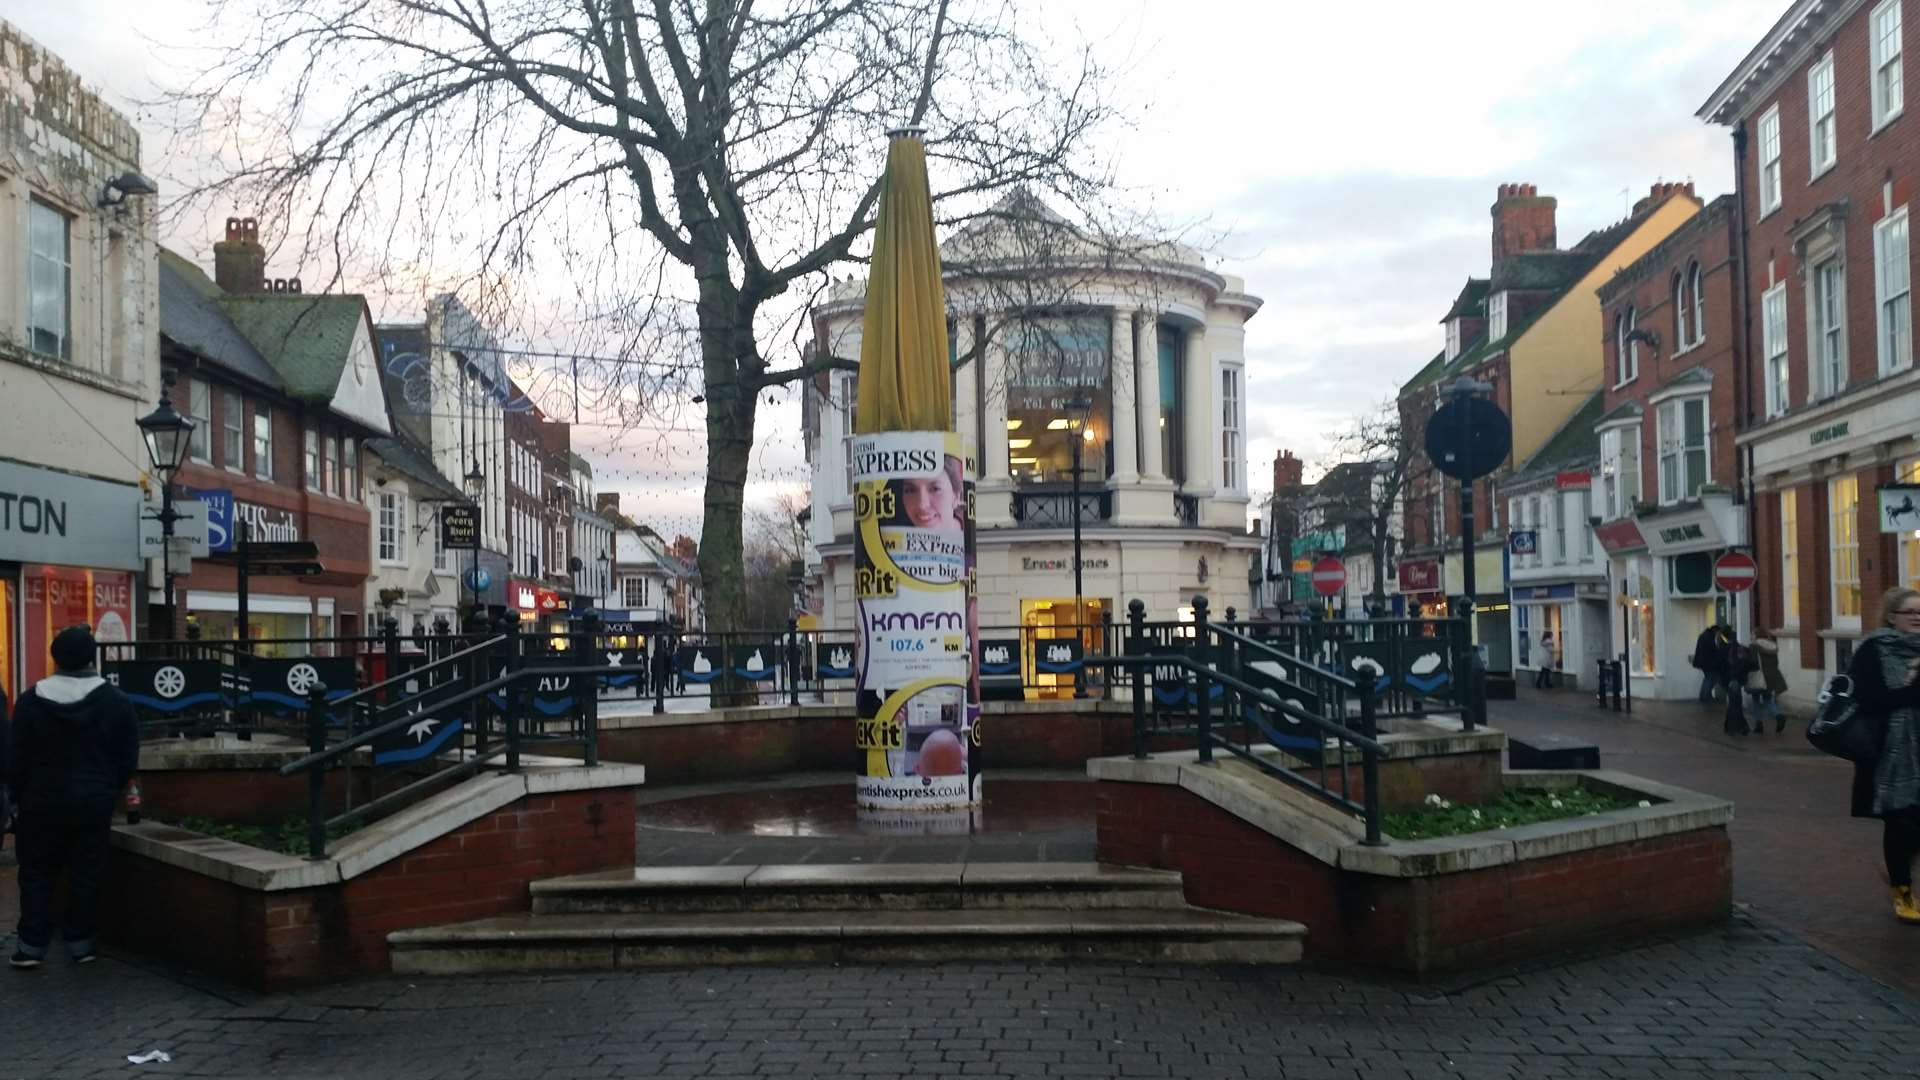 The existing Ashford High Street bandstand